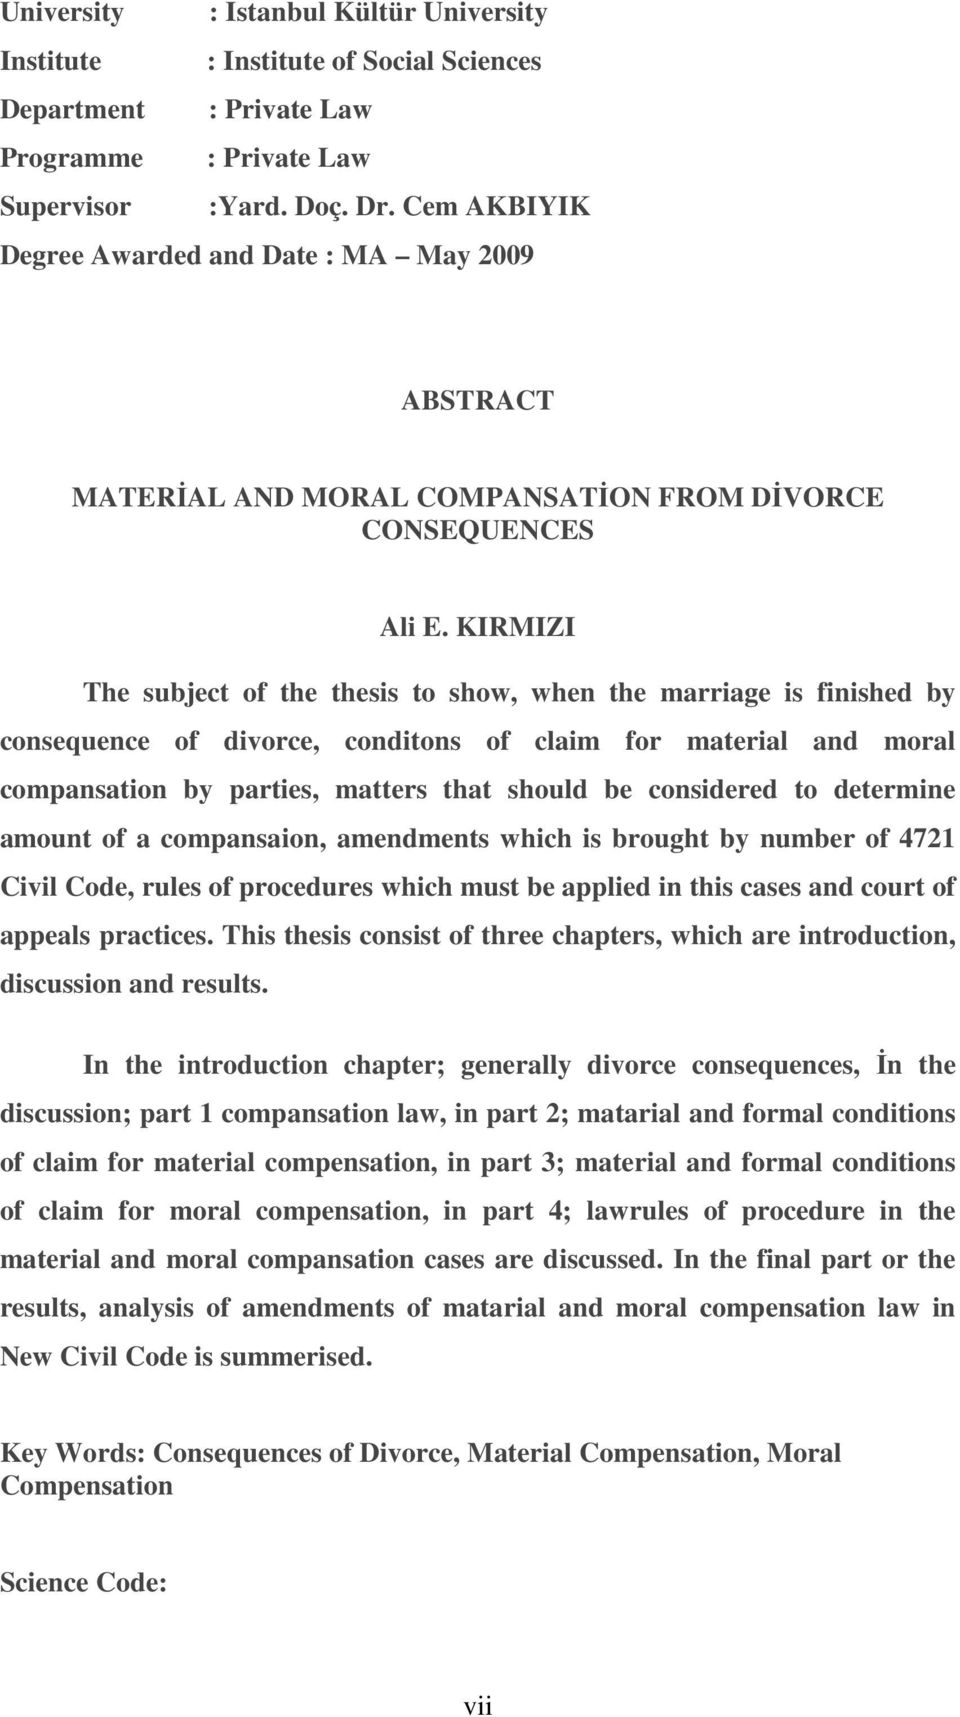 KIRMIZI The subject of the thesis to show, when the marriage is finished by consequence of divorce, conditons of claim for material and moral compansation by parties, matters that should be